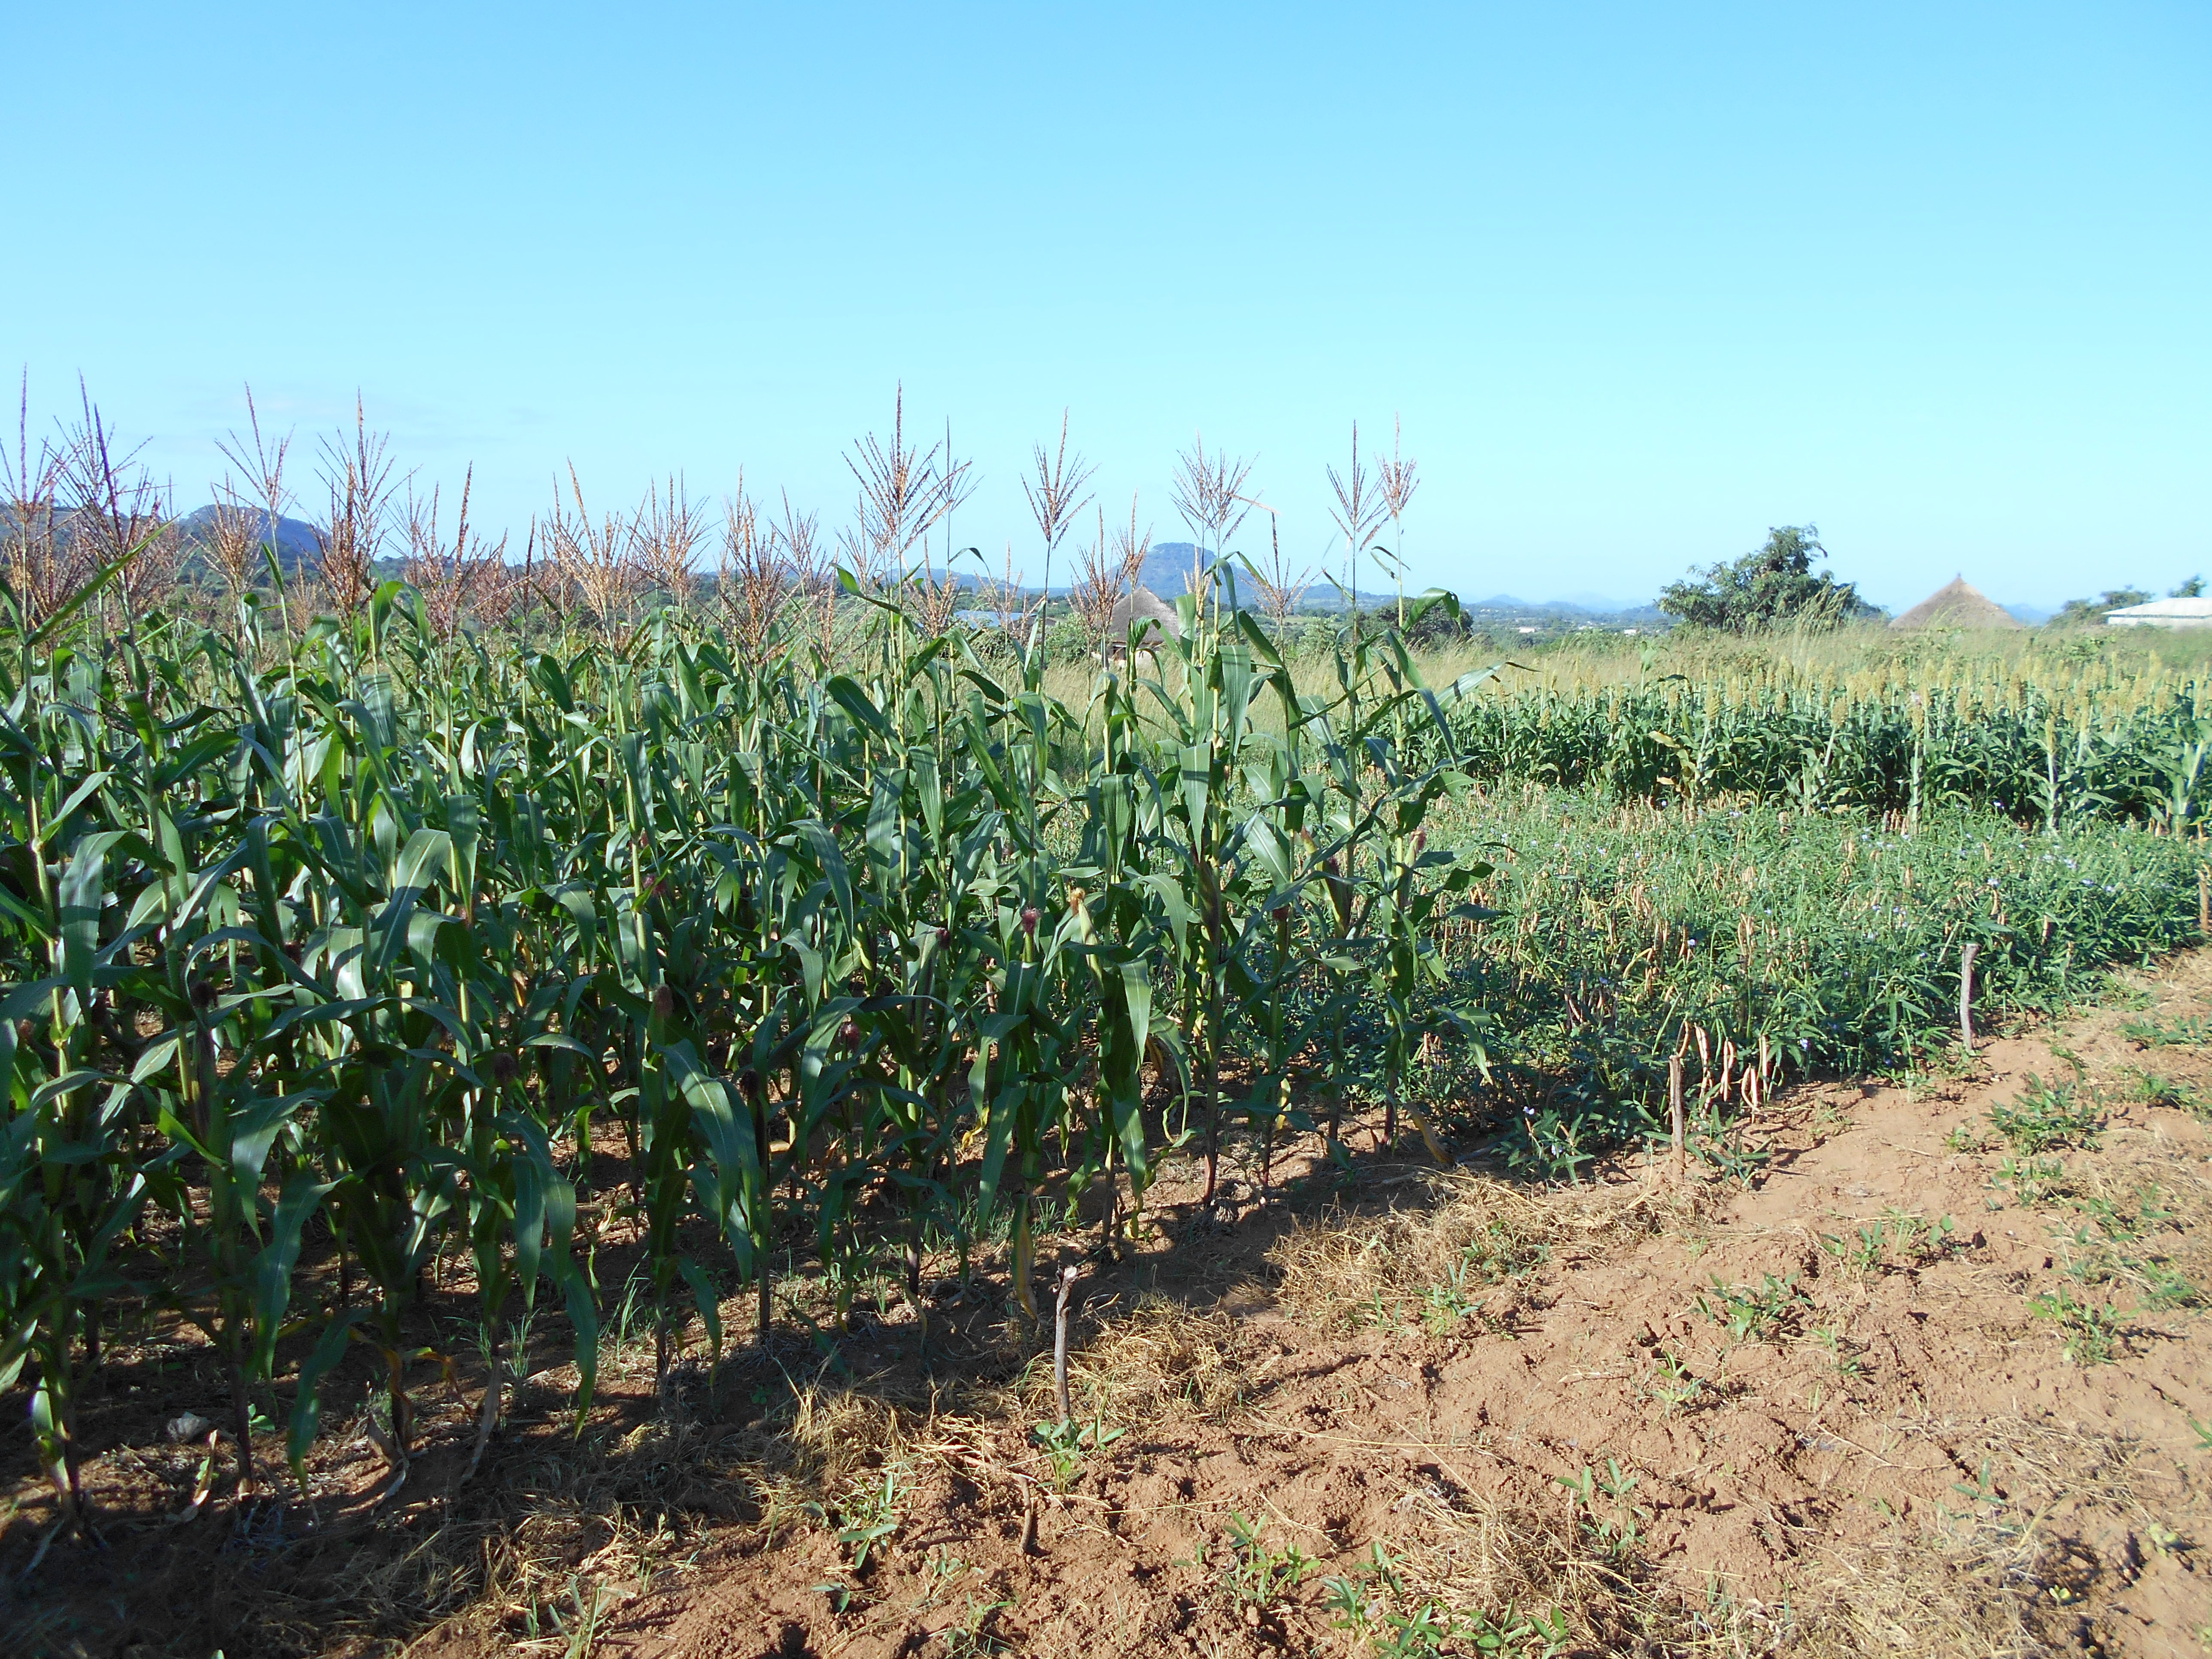 A baby trial with DT maize, cowpea and white sorghum in Chebvute. Photo: C. Thierfelder/CIMMYT